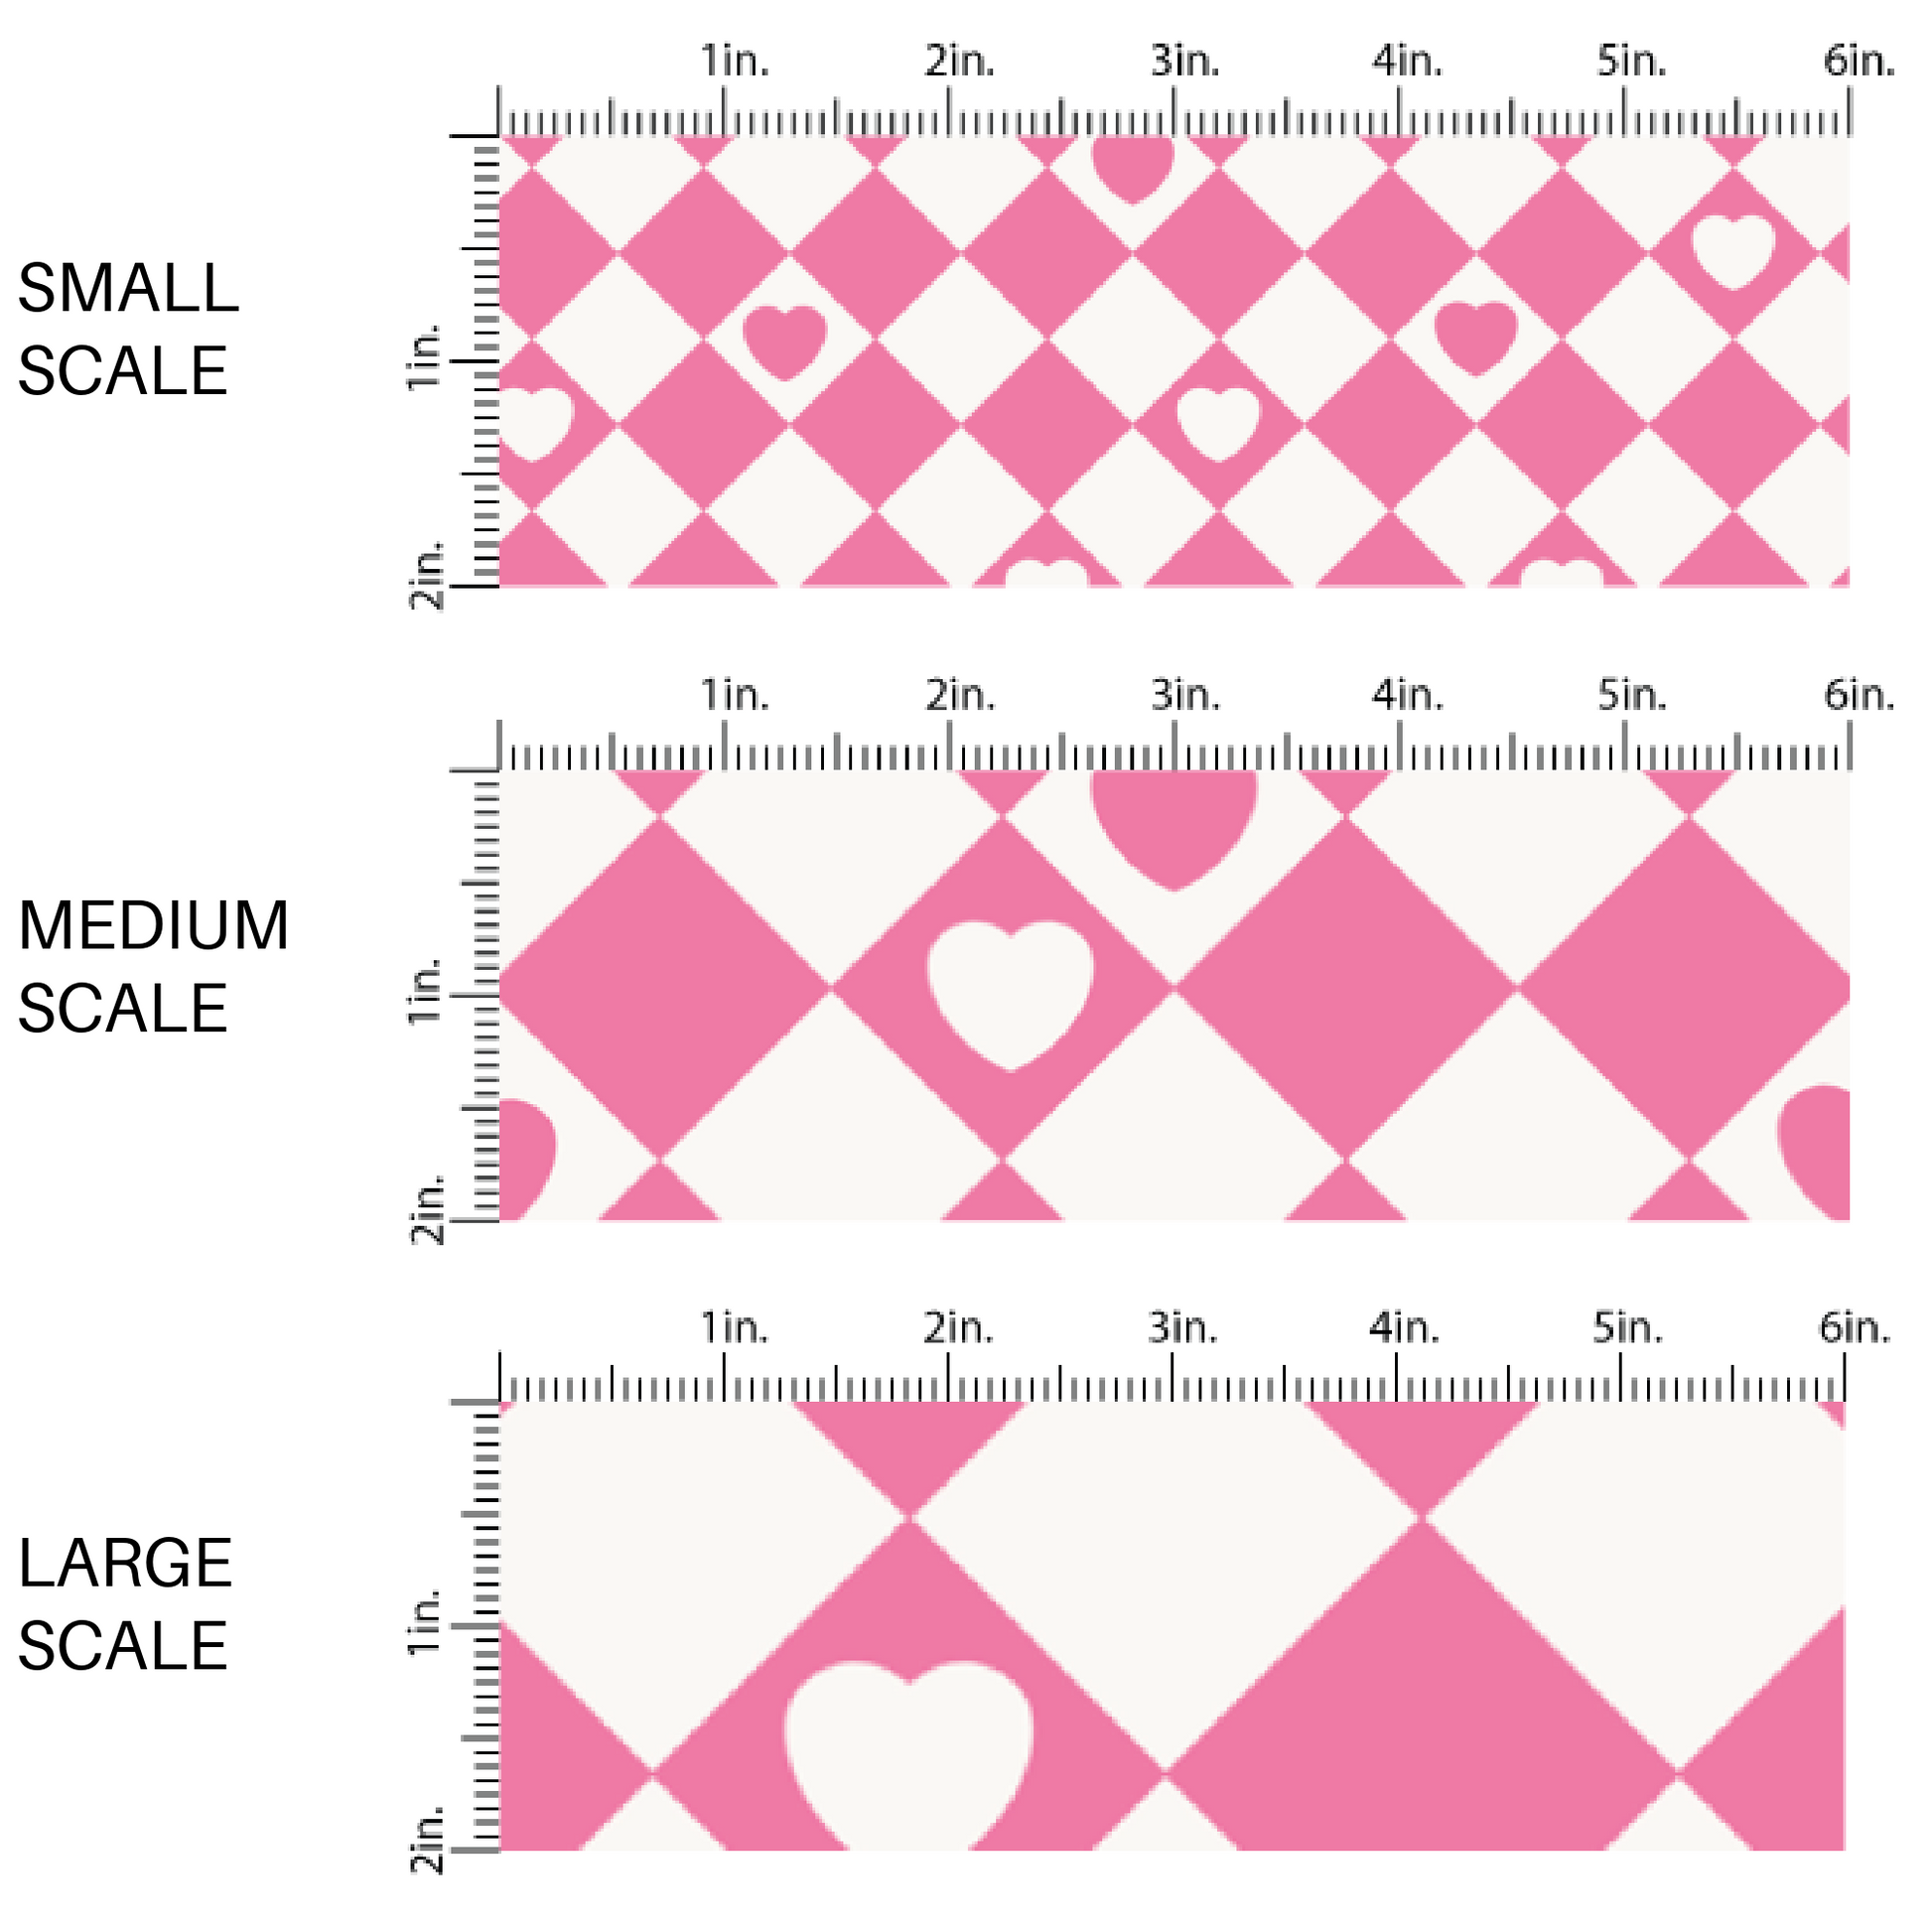 Hearts on Pink and White Checkered Print Fabric by the Yard scaled image guide.